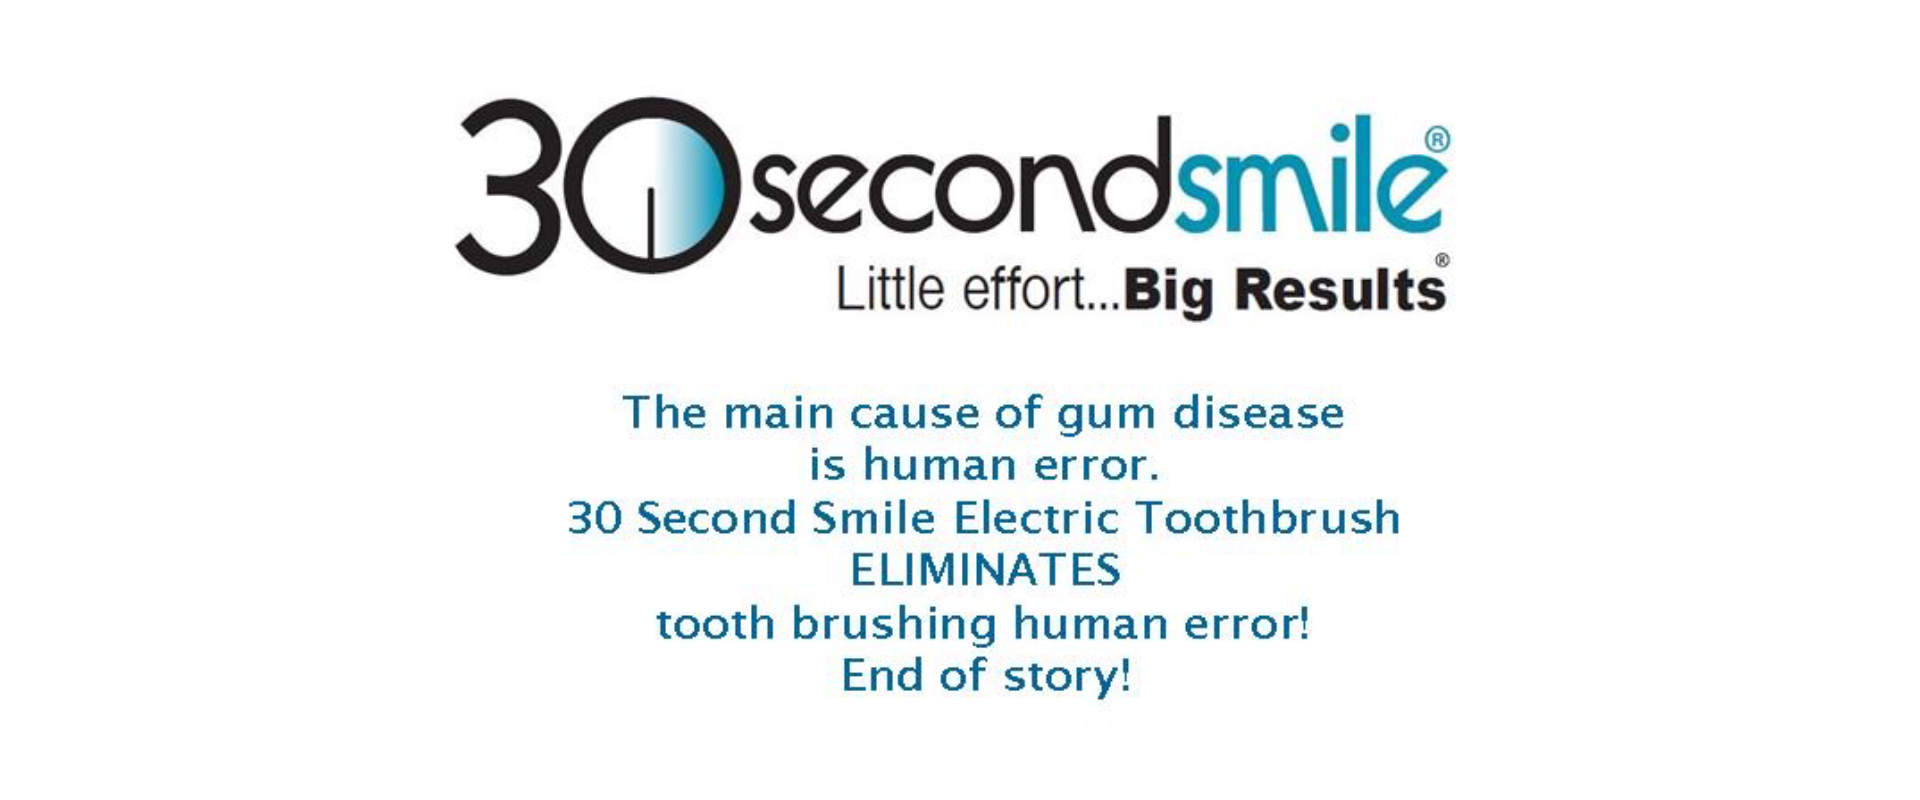 Brush your gums; save your teeth and your health! A report from the United States Centers